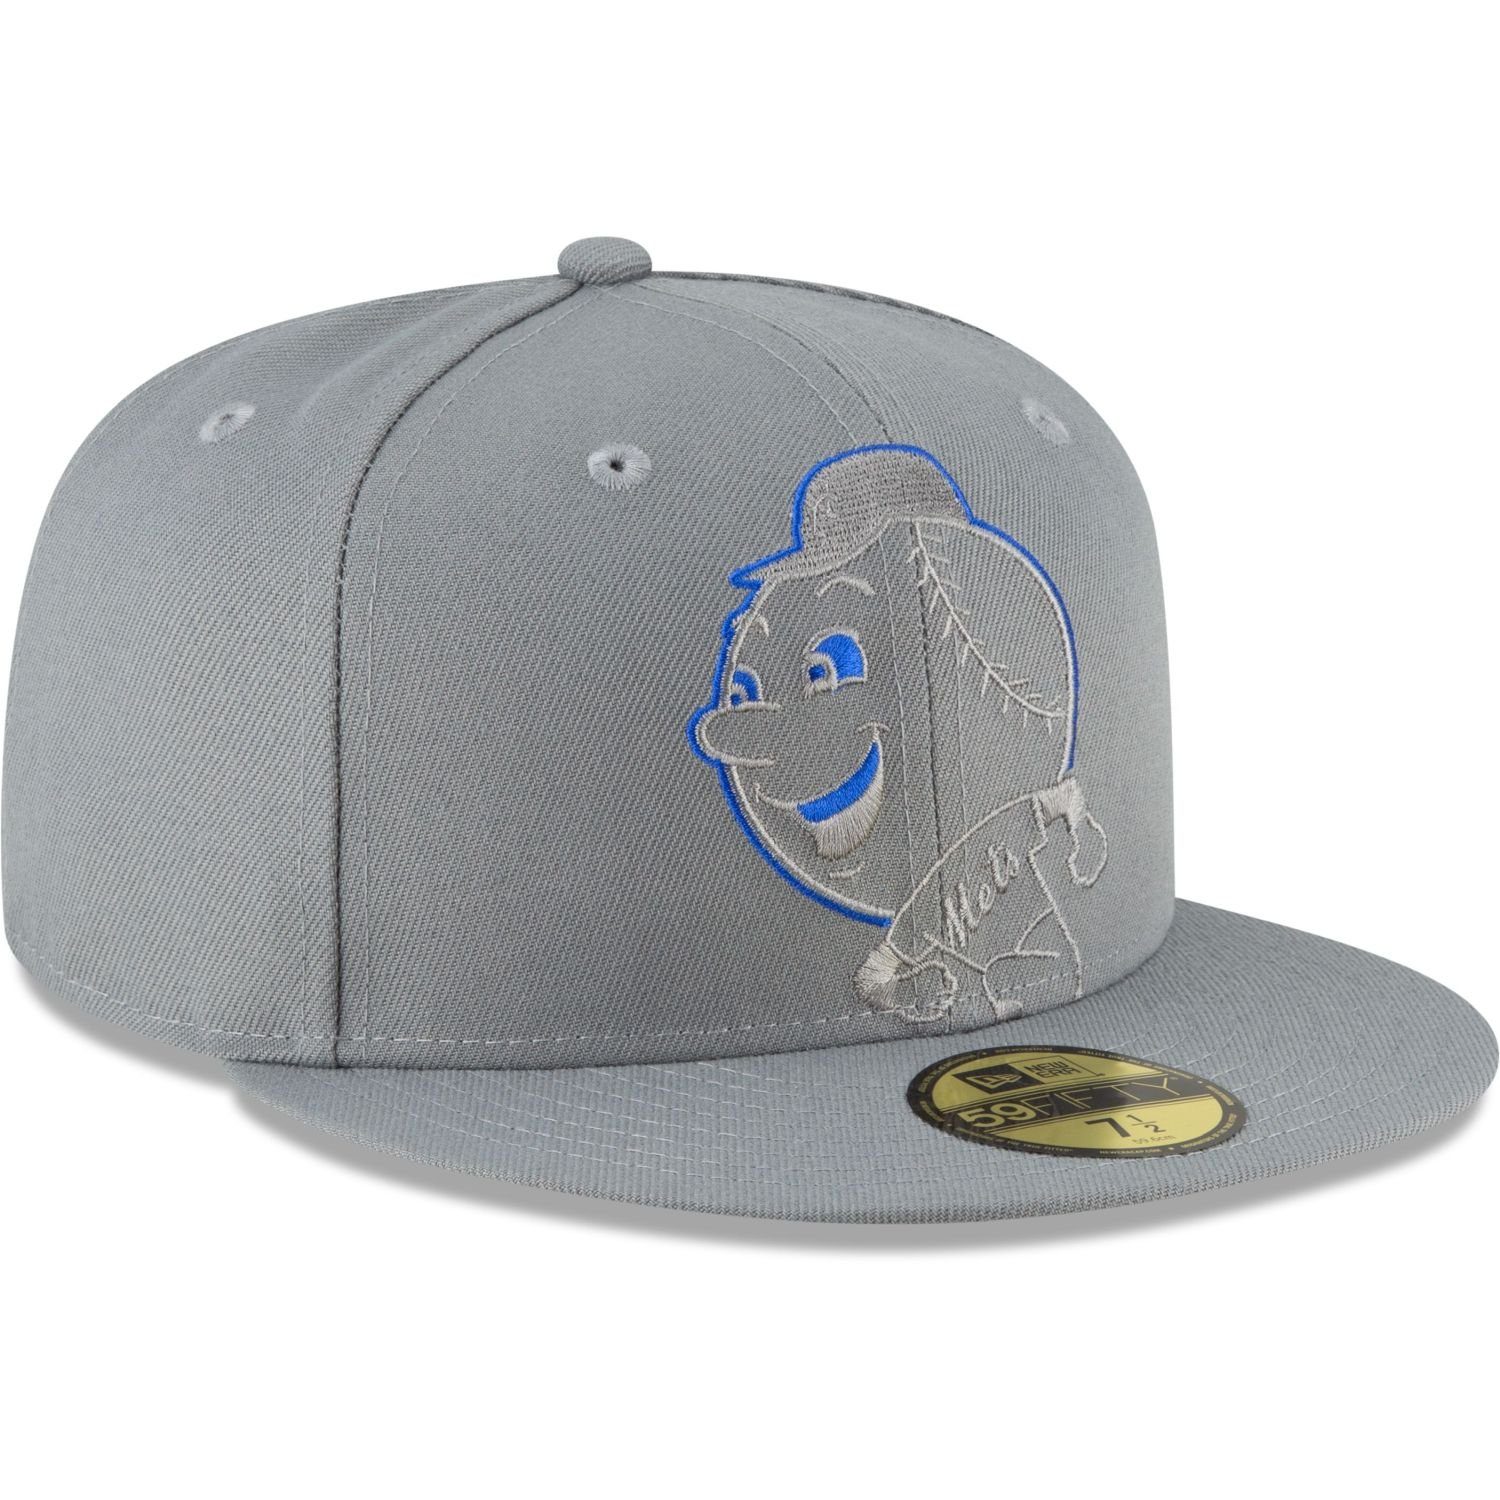 MLB York Cap New Cooperstown New Fitted 59Fifty Era Mets STORM GREY Team